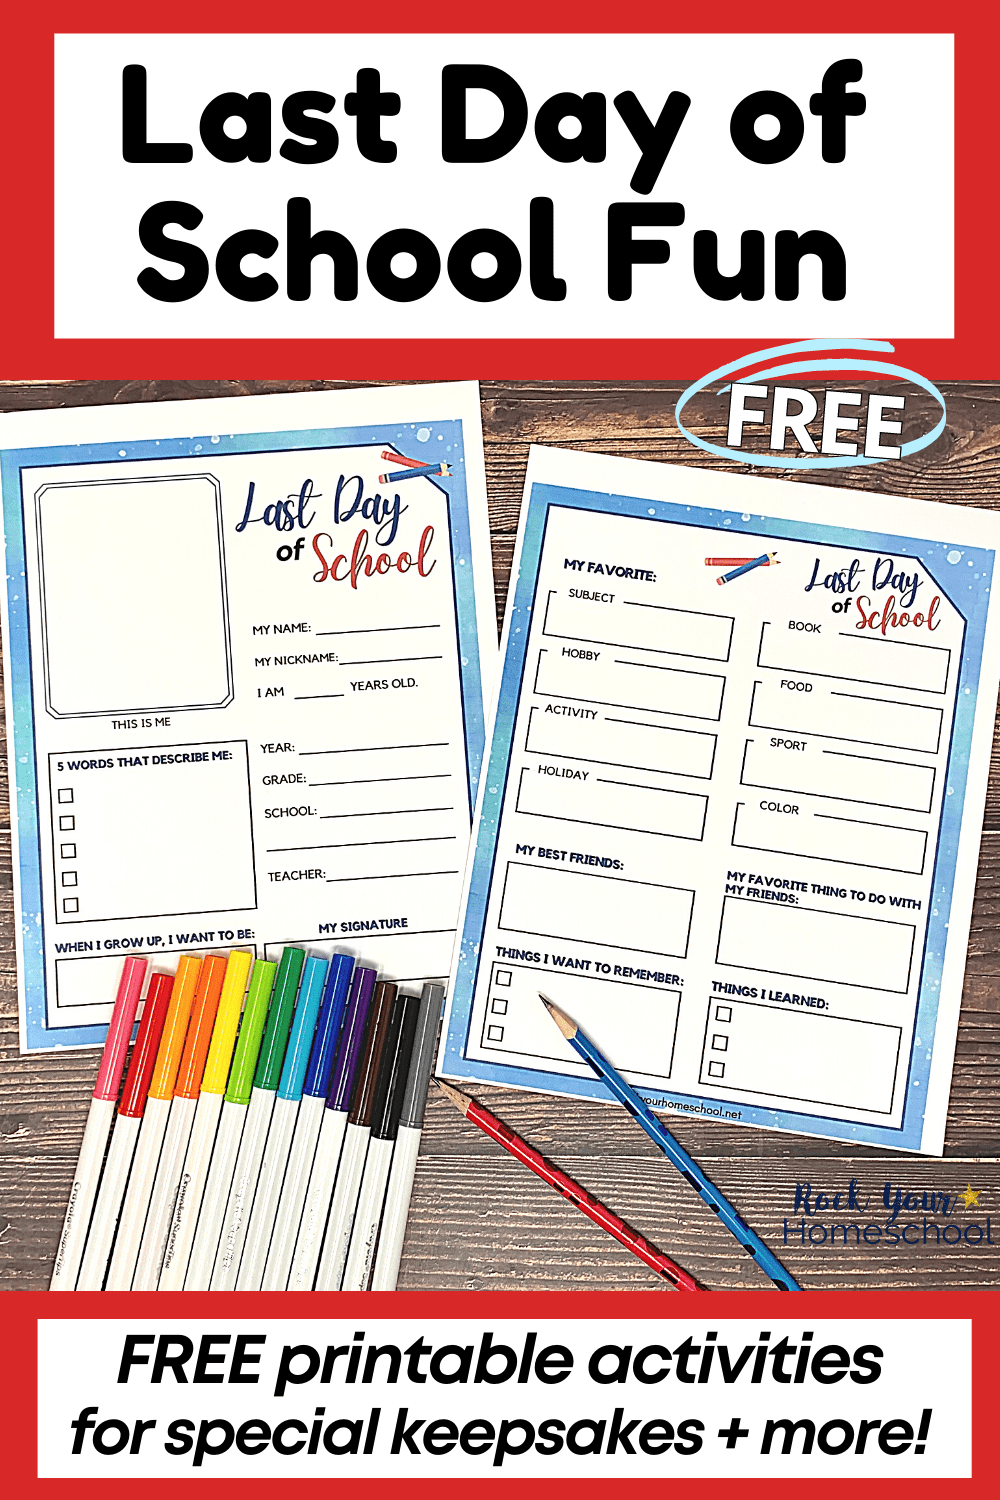 Last Day of School Printables: Perfect Activities for Fun Keepsakes and More (Free)